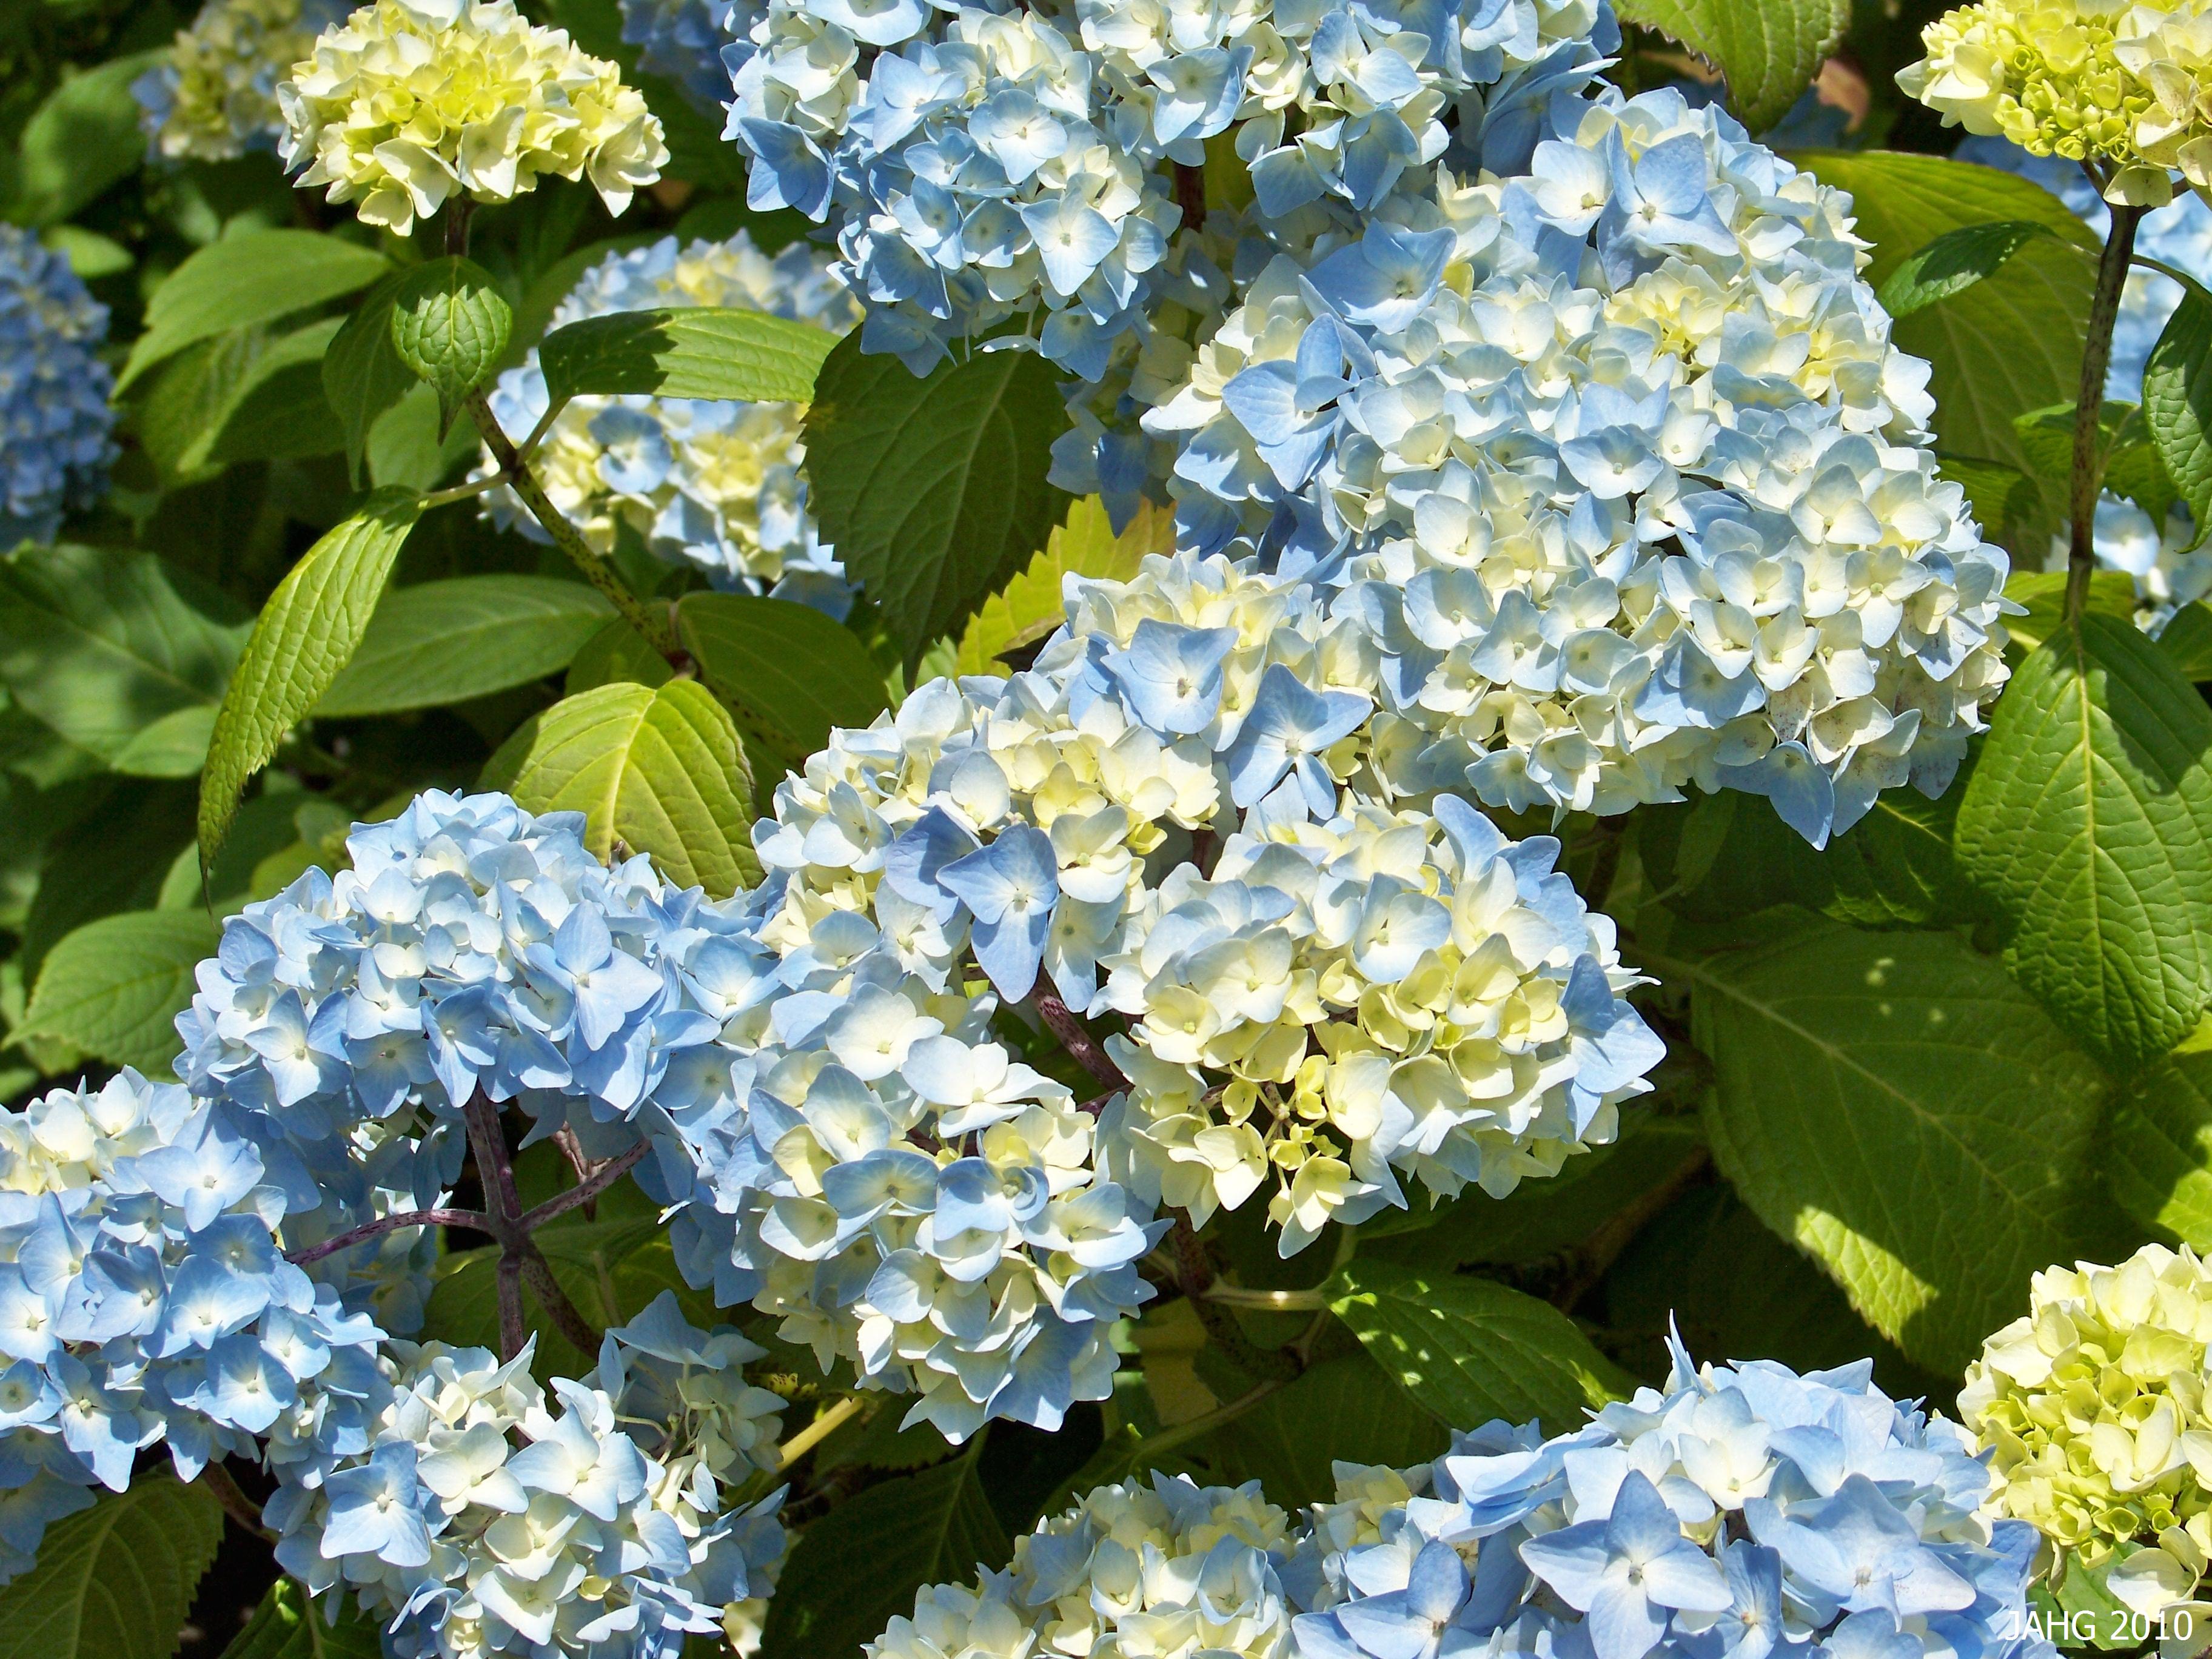 In Japan Hydrangeas have important cultural and artistic significance 